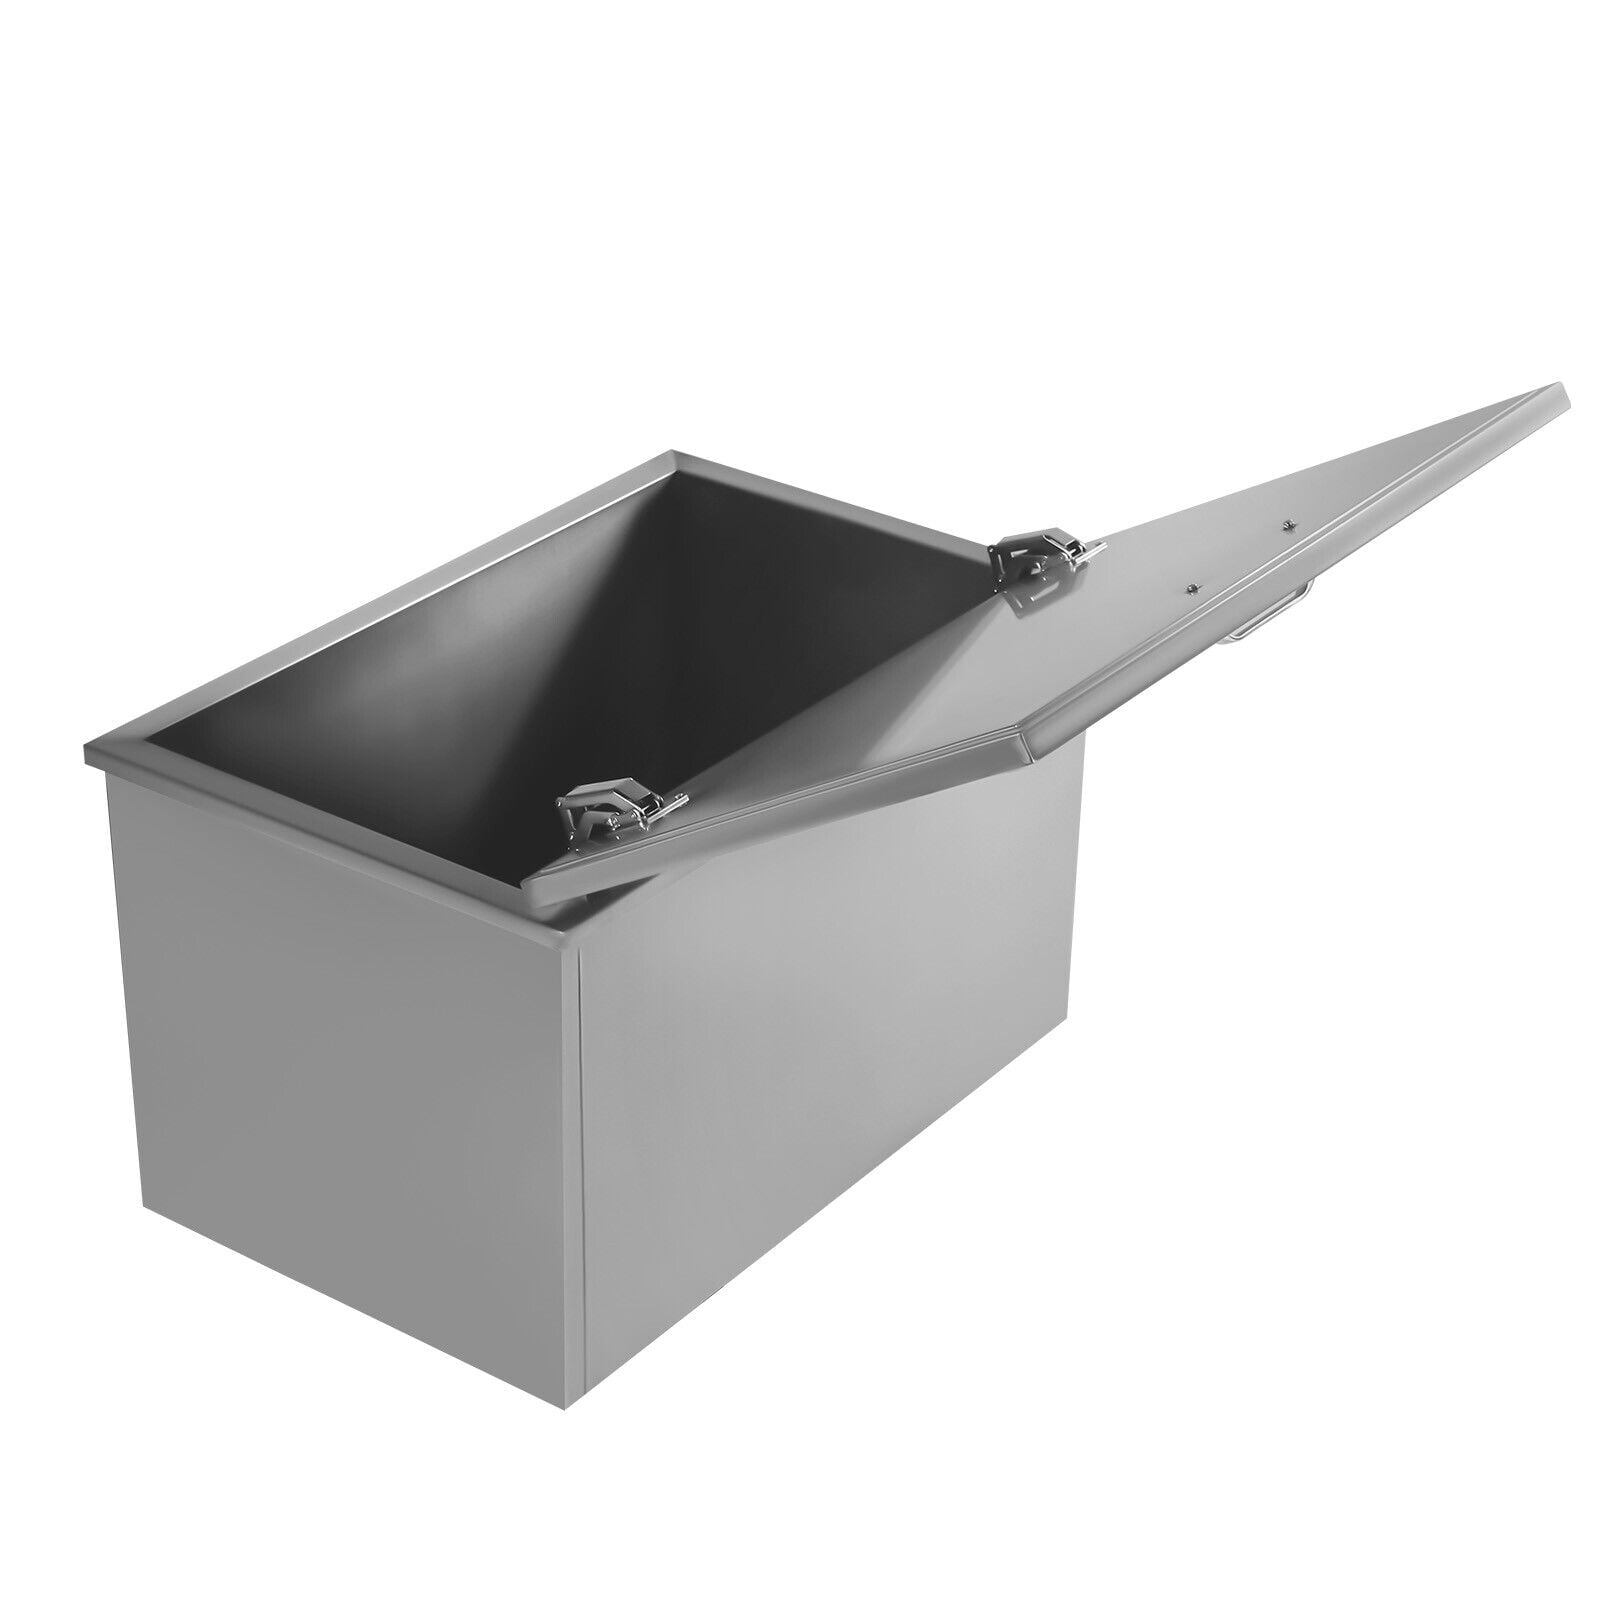 The Right Way to Clean Stainless Steel Ice Bins – IMC/TEDDY